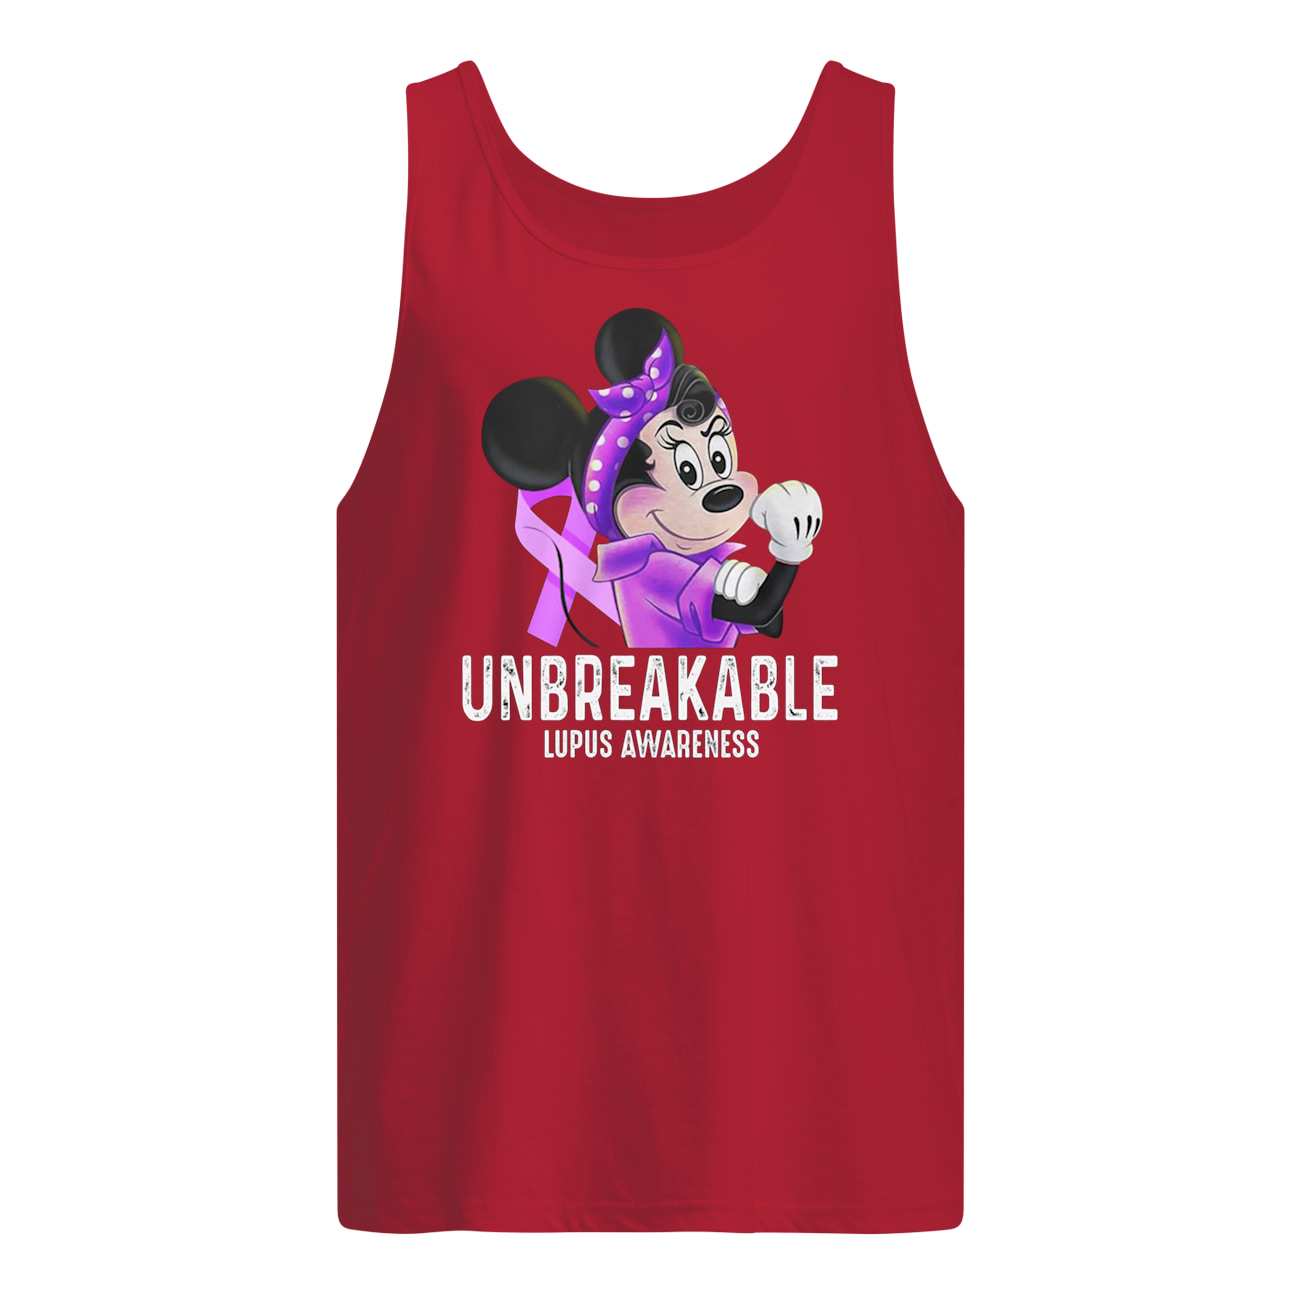 Minnie mouse unbreakable lupus awareness tank top